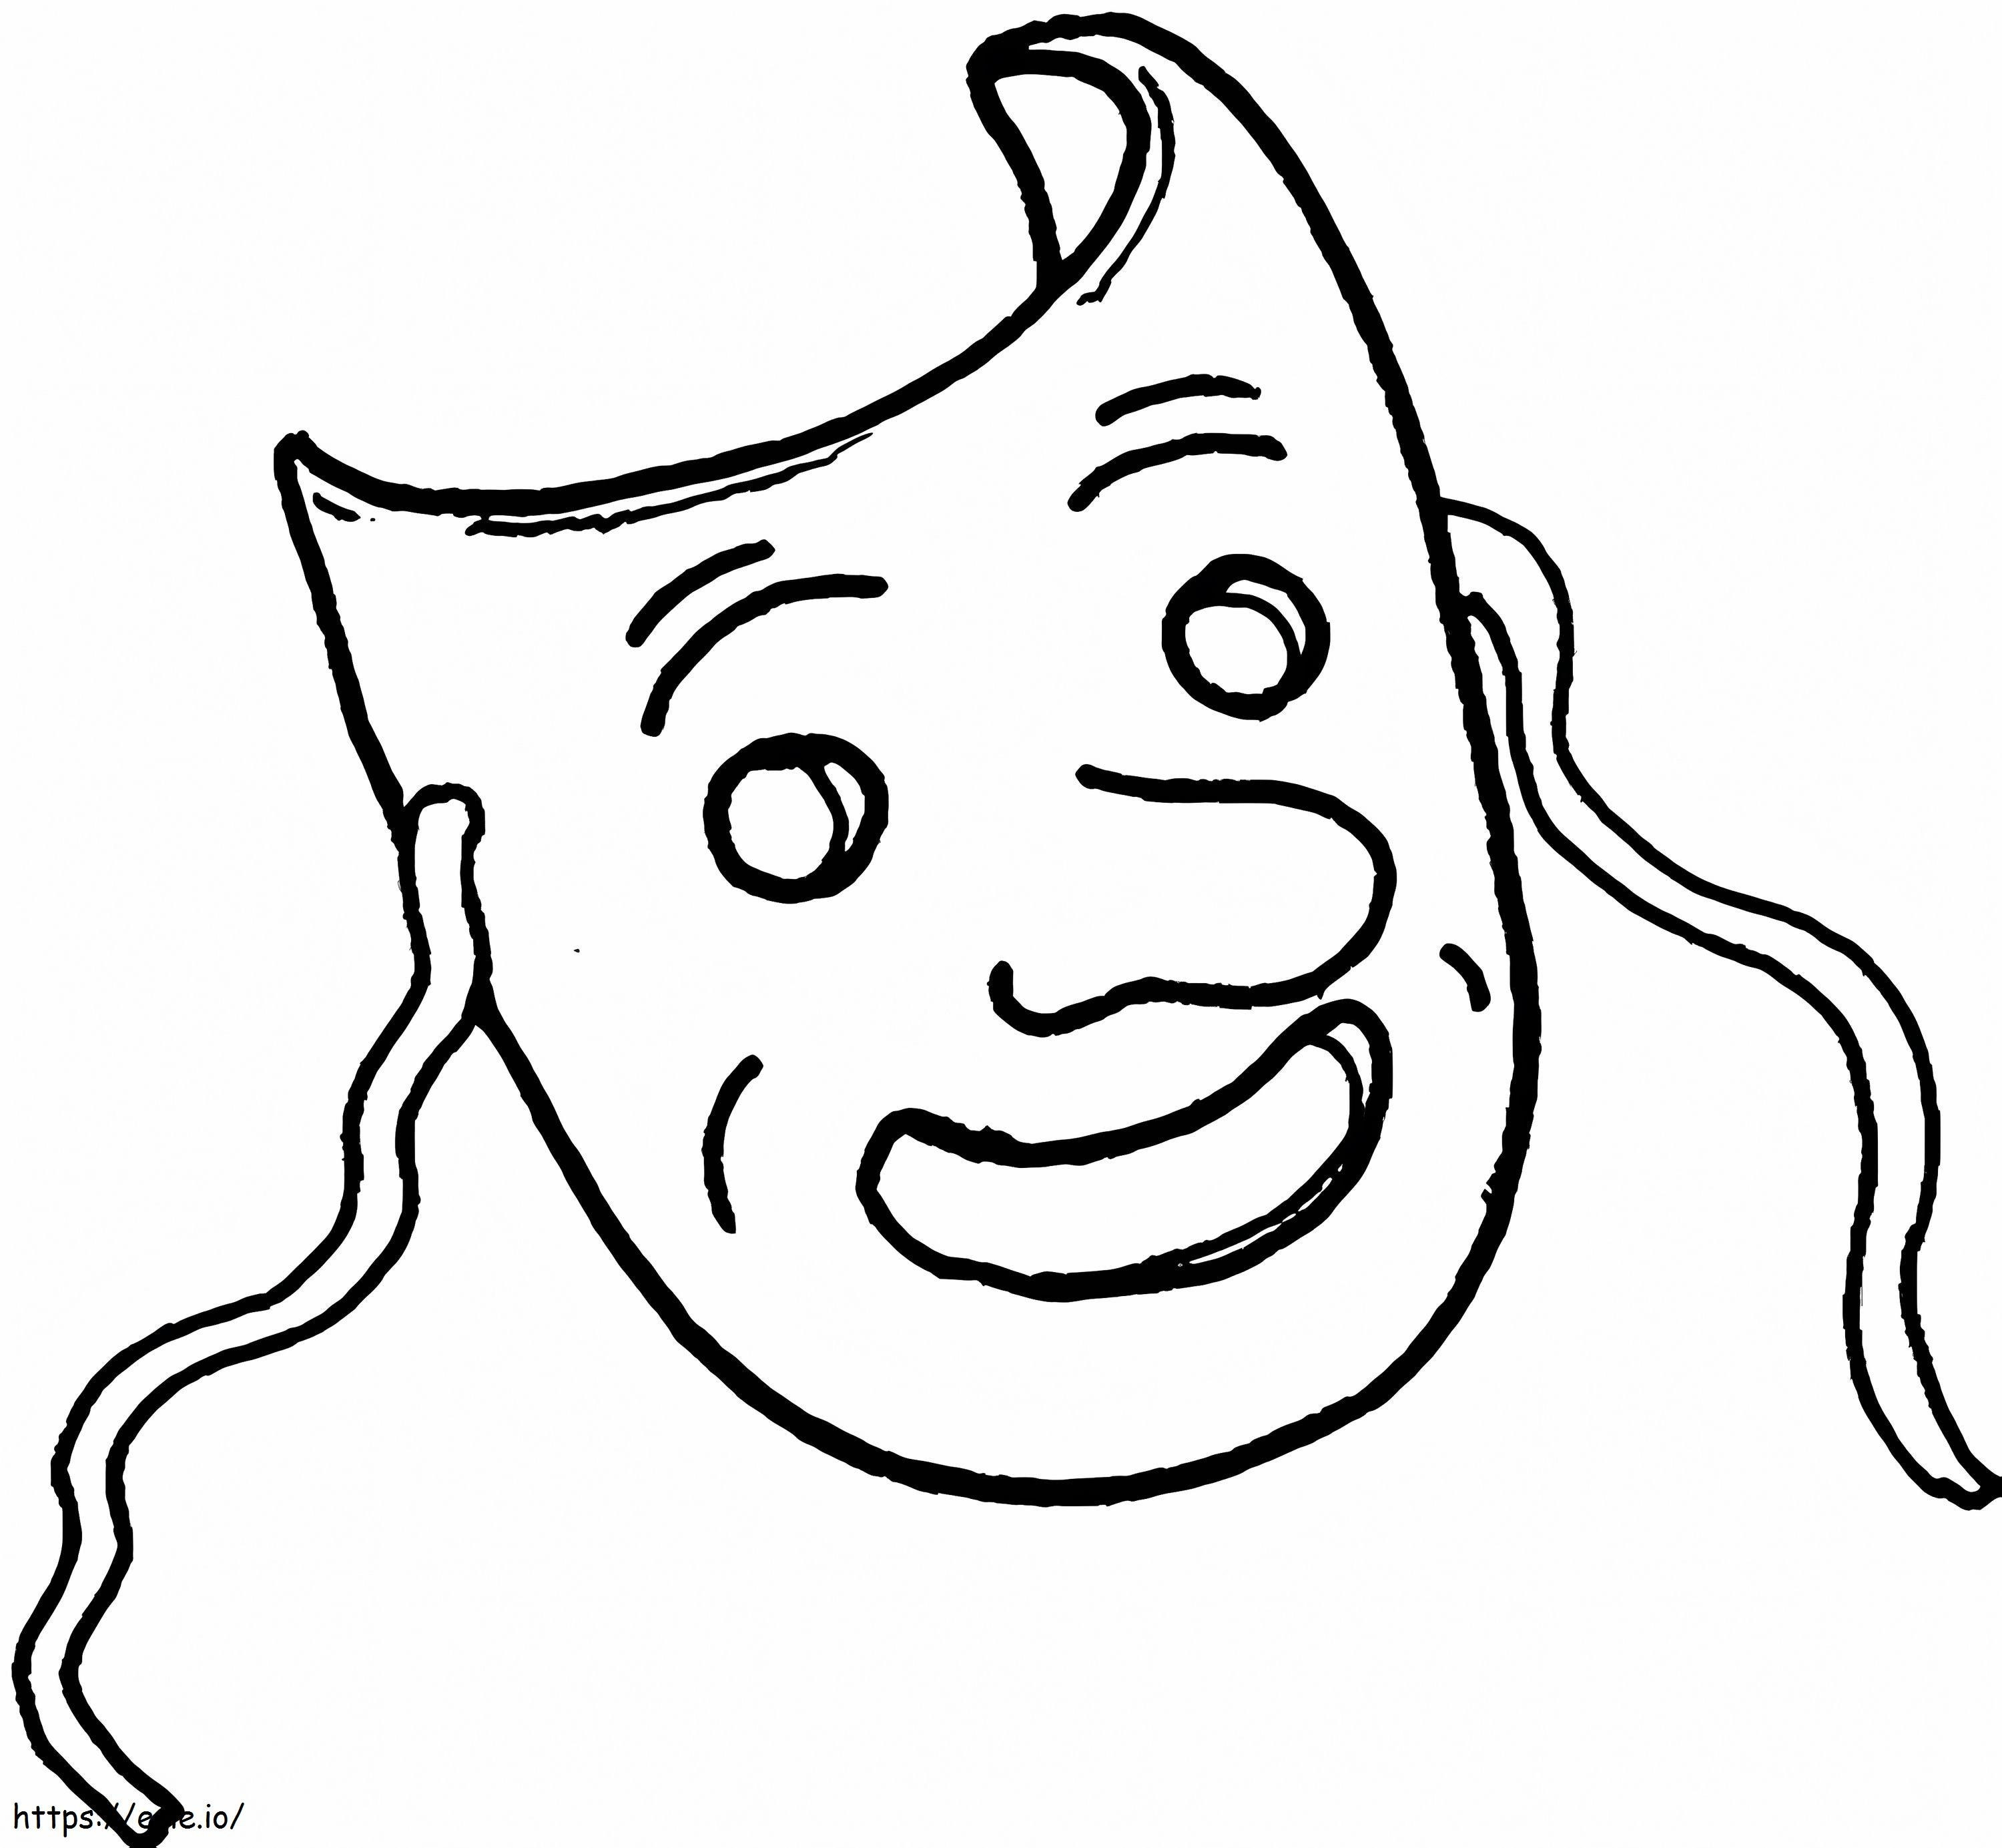 Awesome Mask coloring page